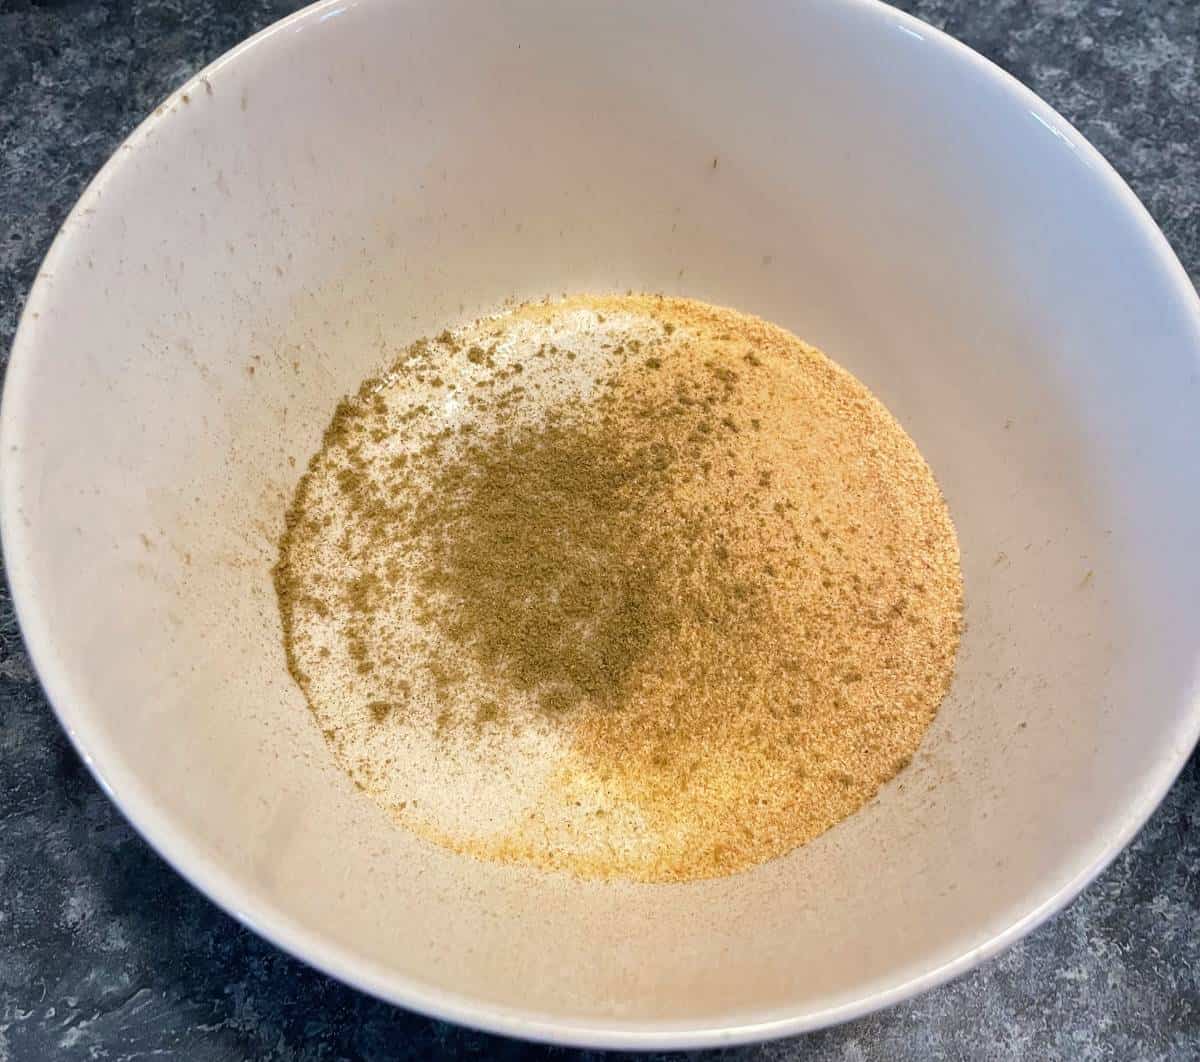 garlic powder and other spices in a bowl for a pork tenderloin dry spice rub.